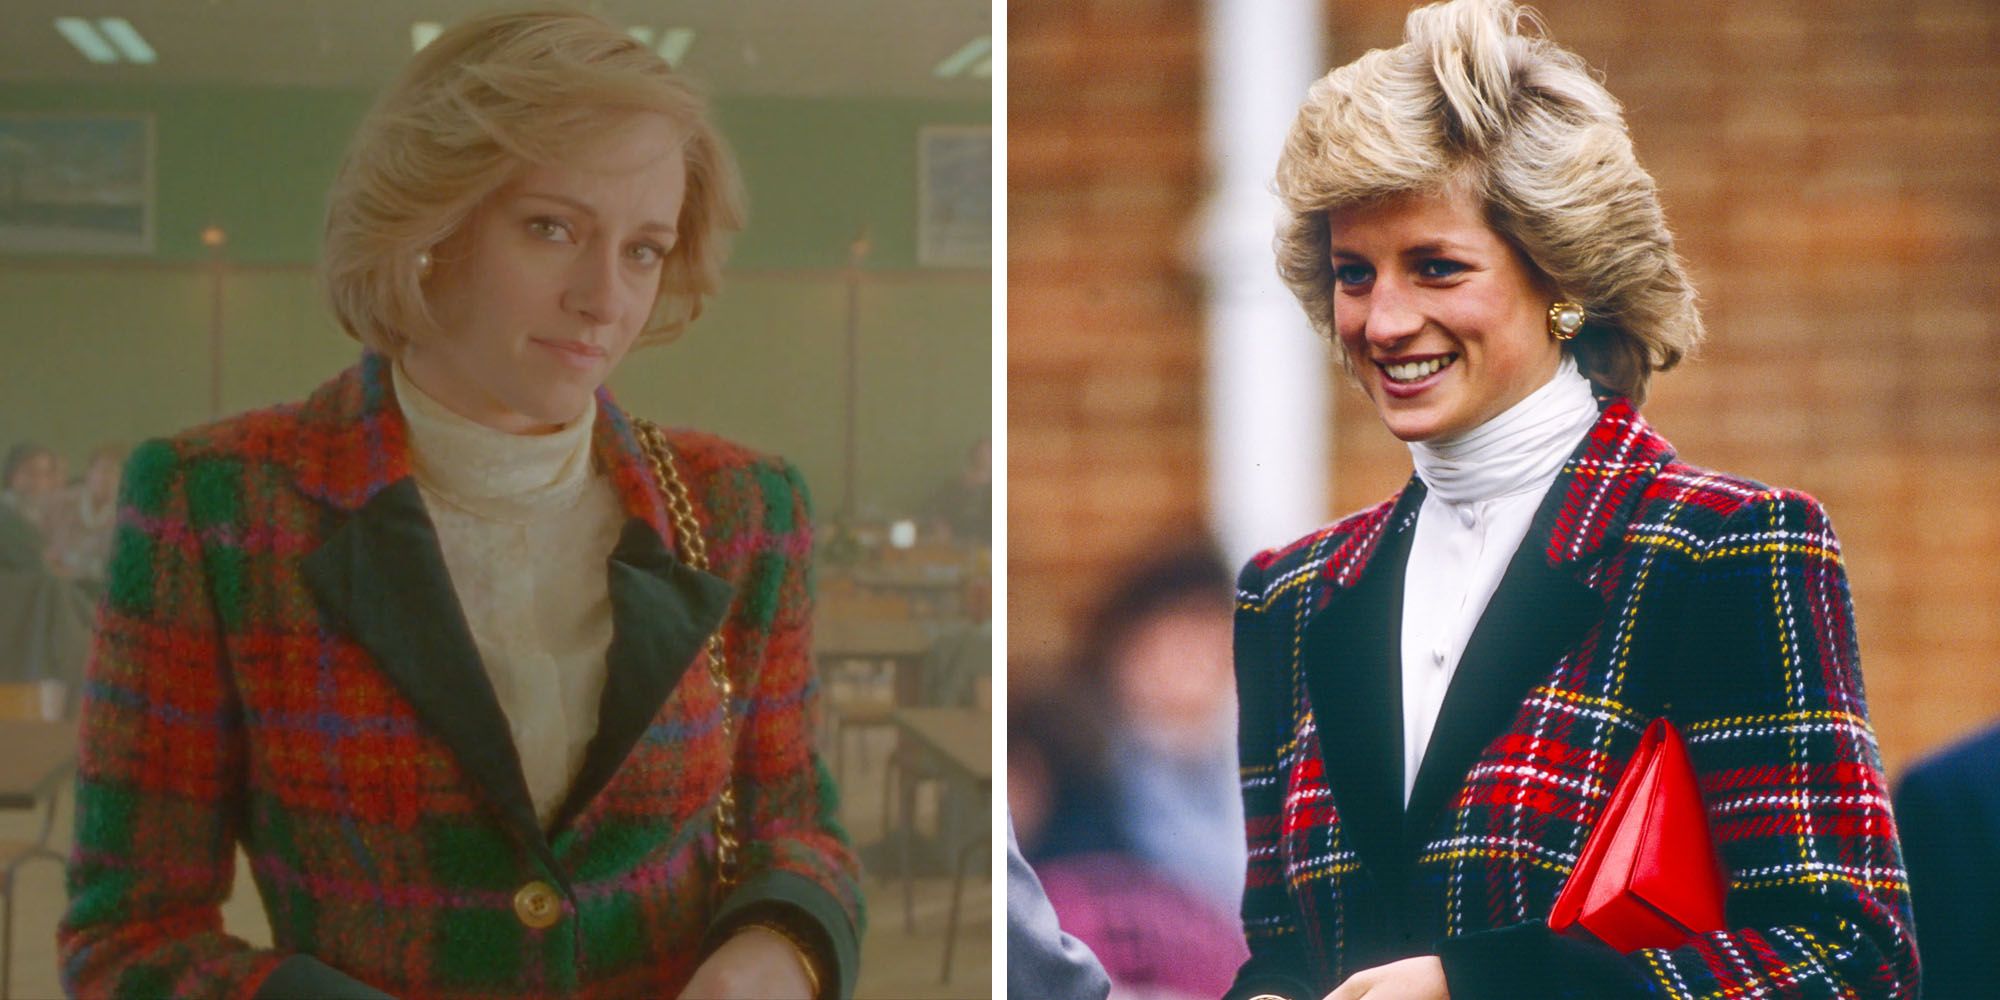 Four 'Spencer' Looks That Princess Diana Wore in Real Life